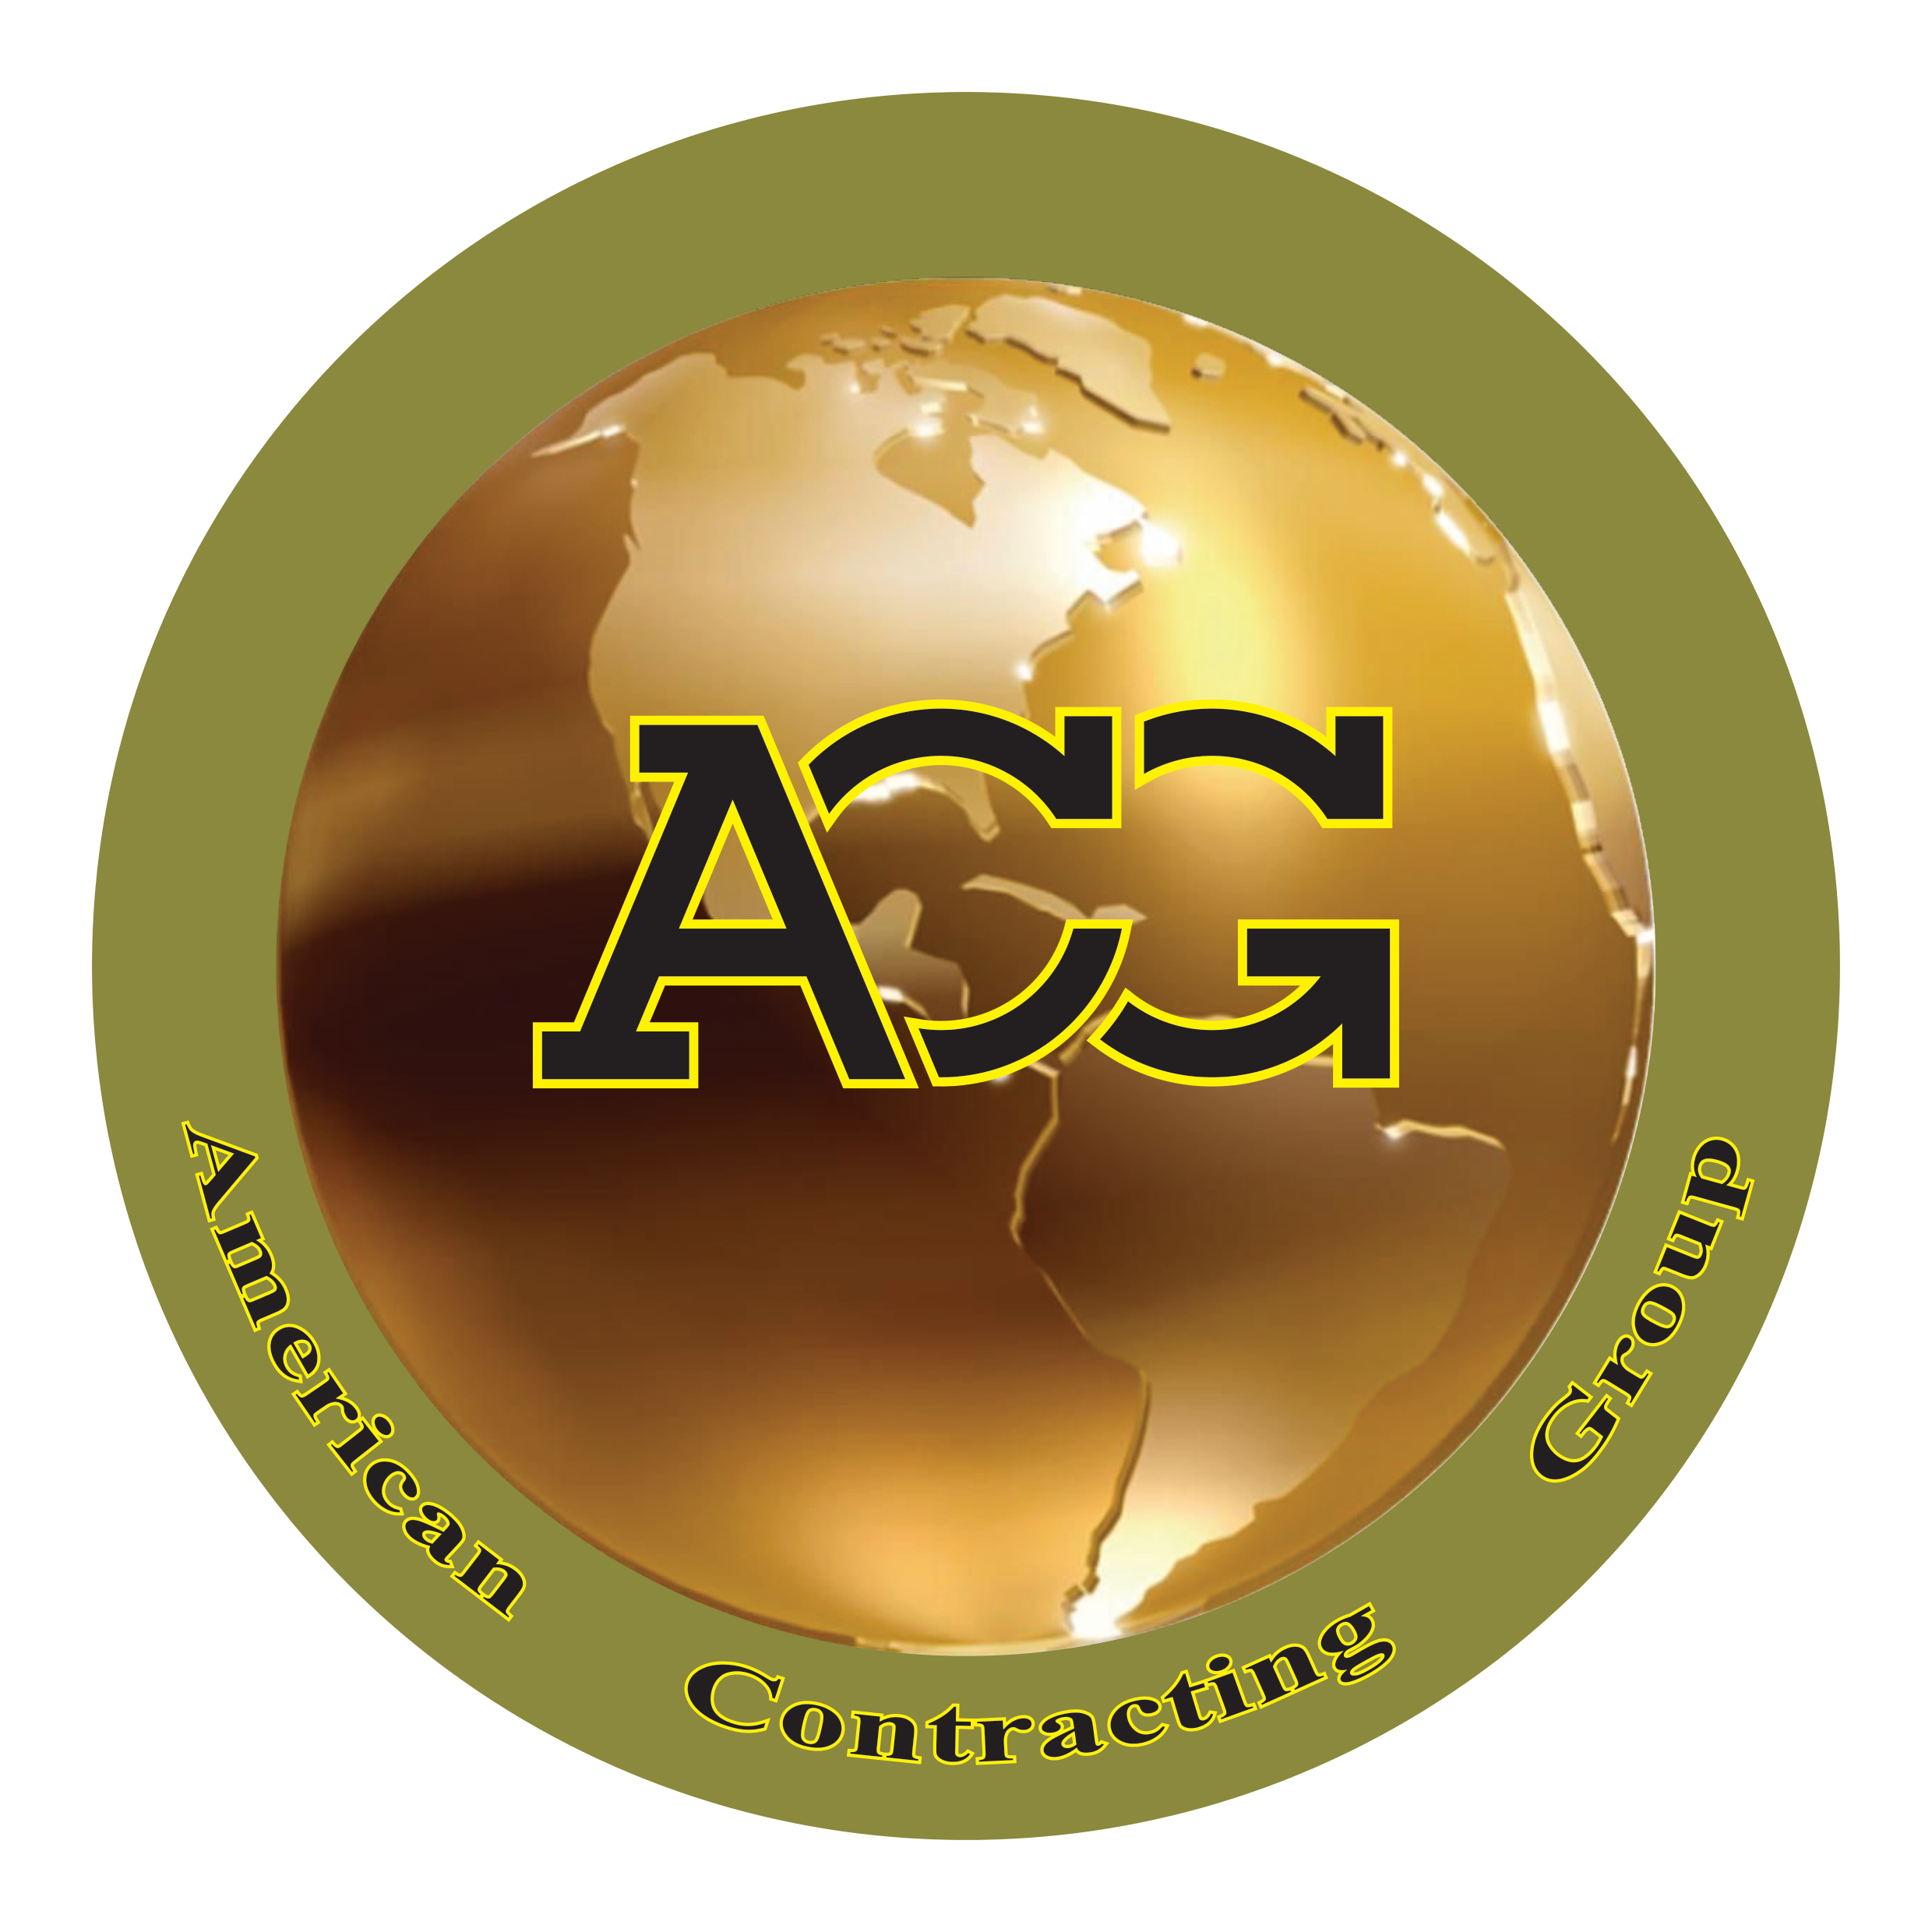 American Contracting Group